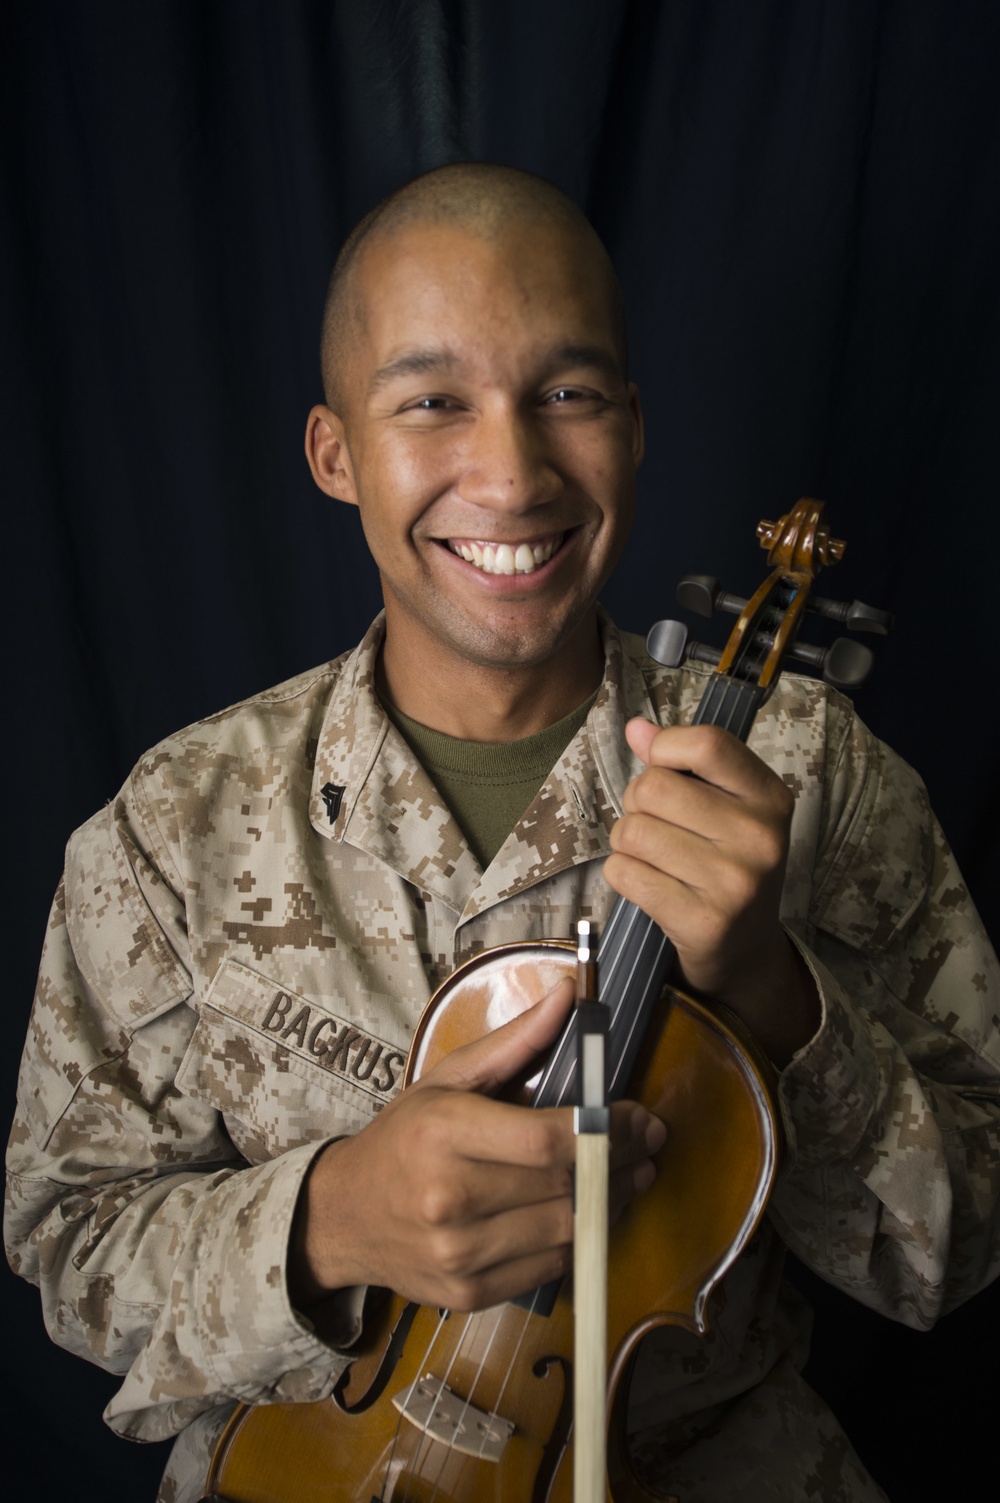 Maestro of the Rushmore: U.S. Marine goes an octave above